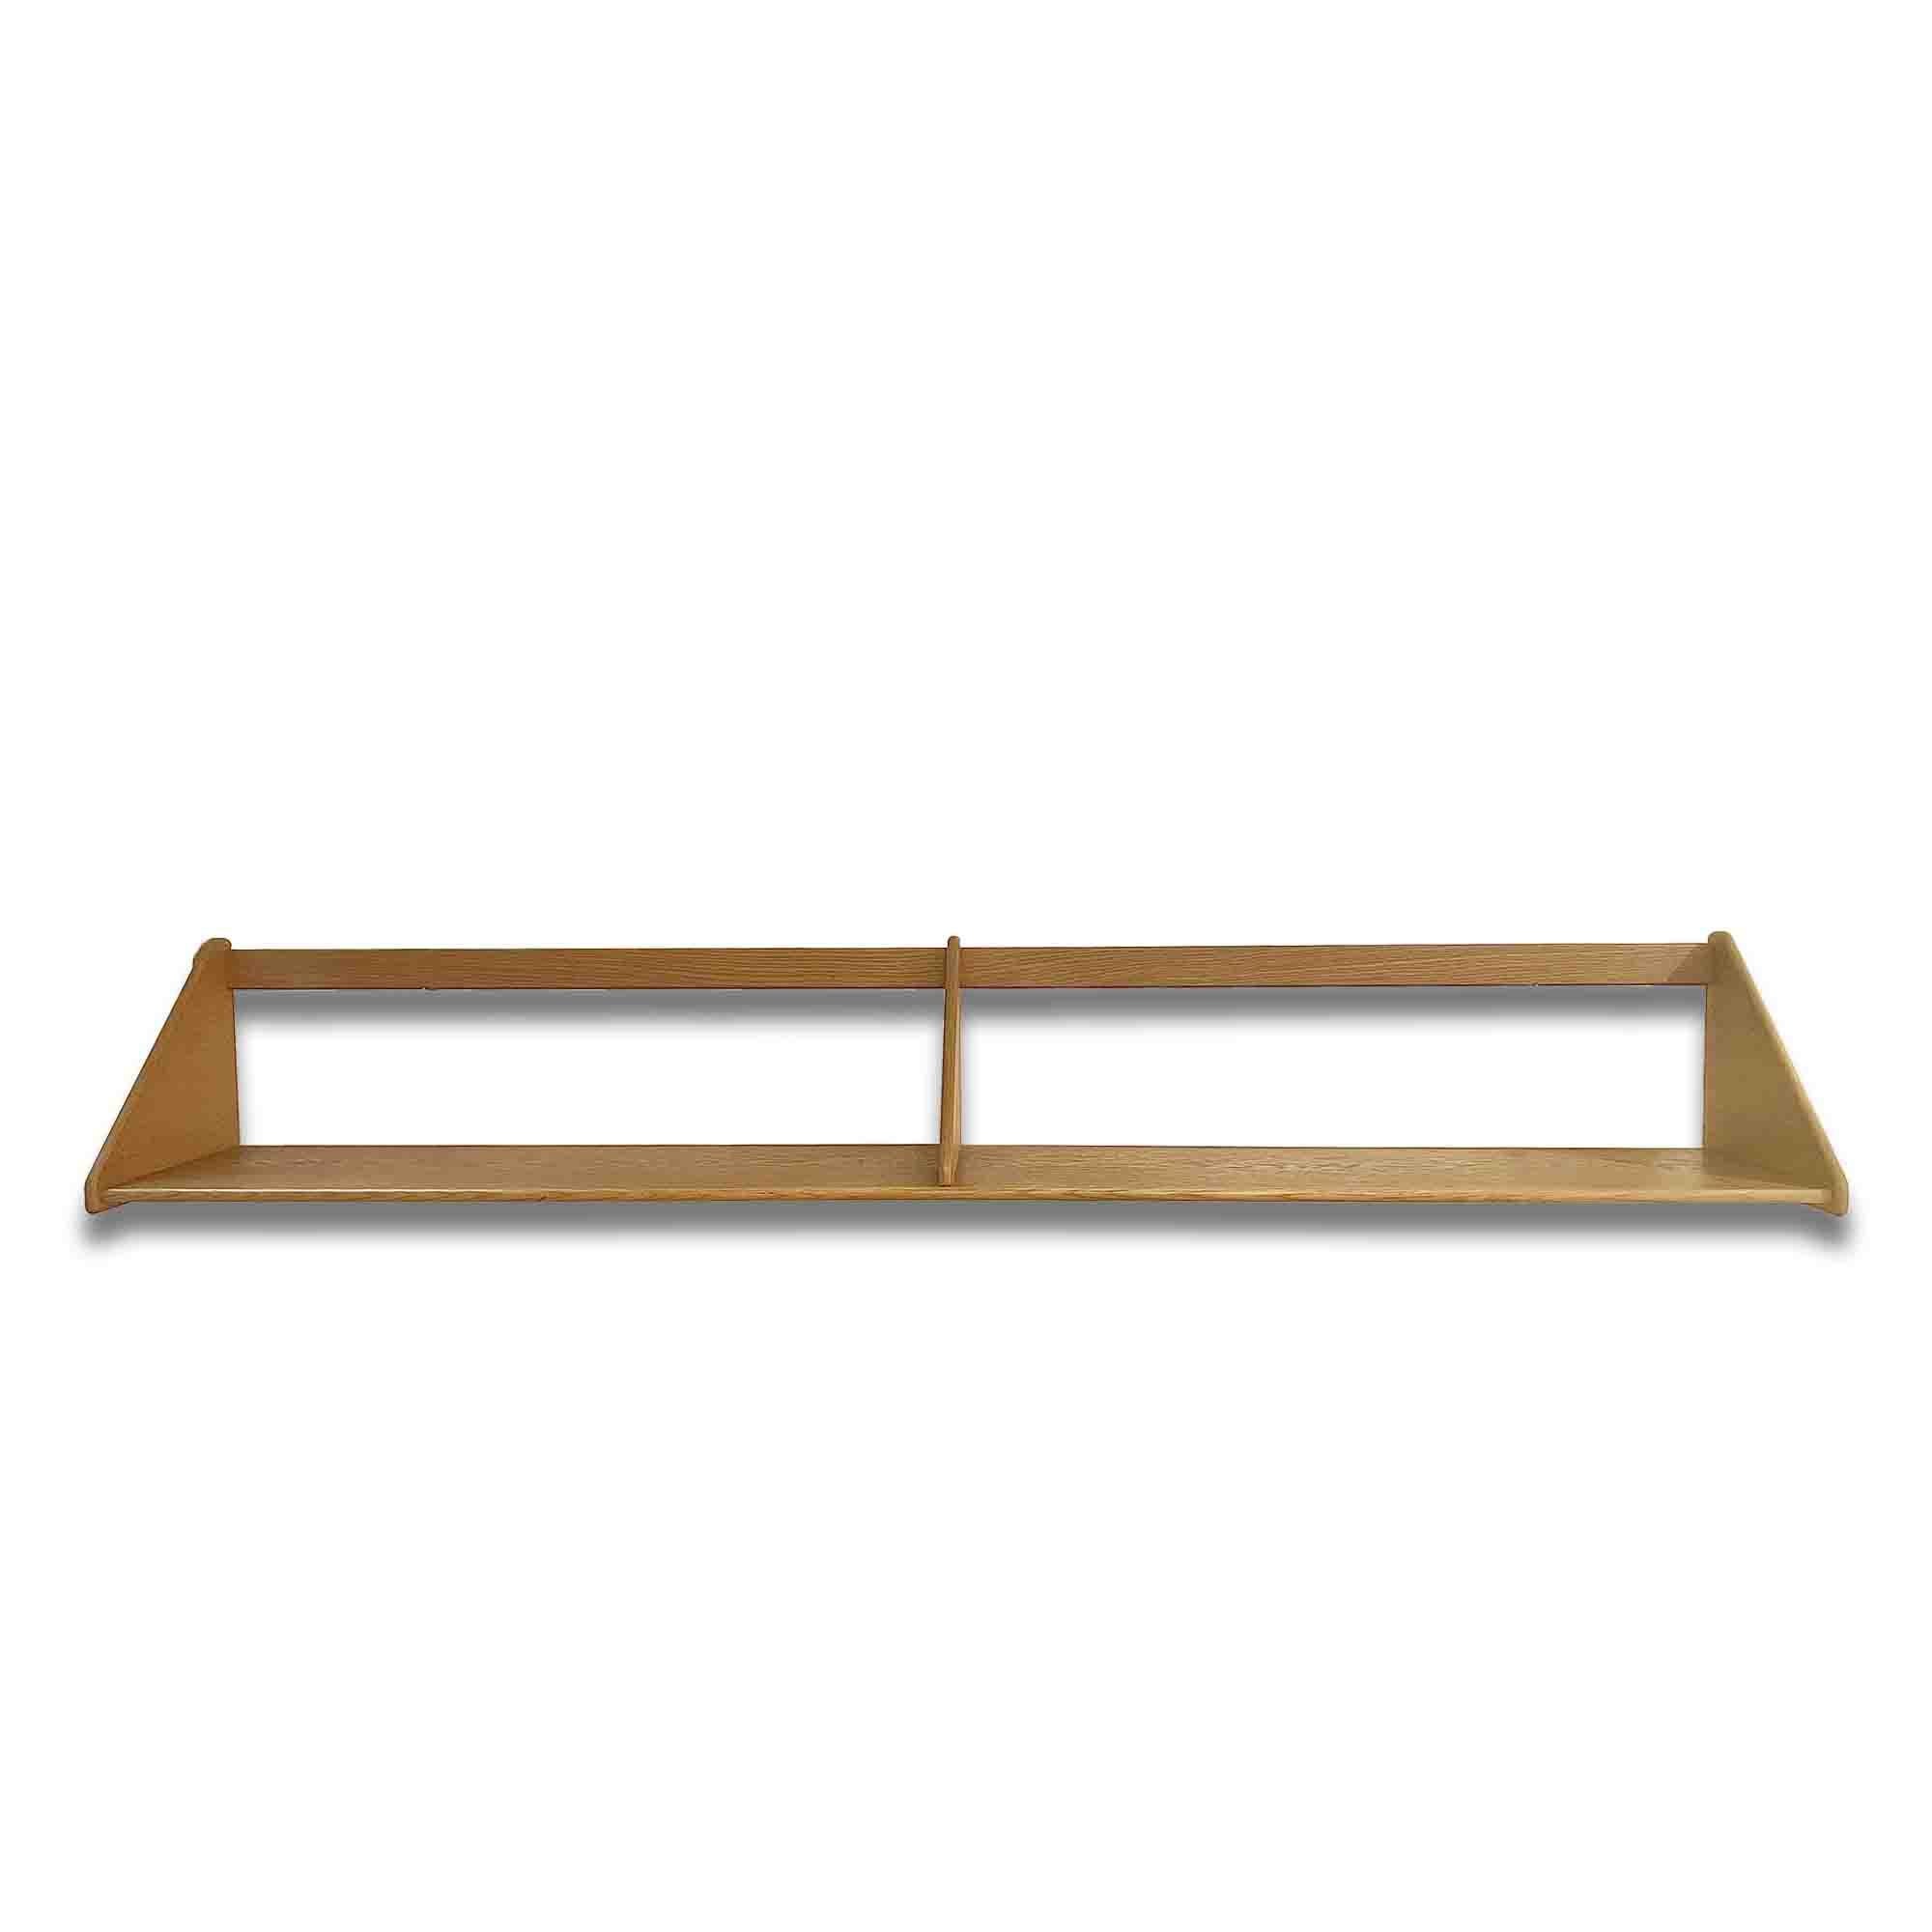 Practical and elegant, this solid oak wall shelf is one of Børge Mogensen's very first models. He designed the shelf while still a student at the Academy of Arts furniture school. The vintage, clean design is over 60 years old, but remains just as